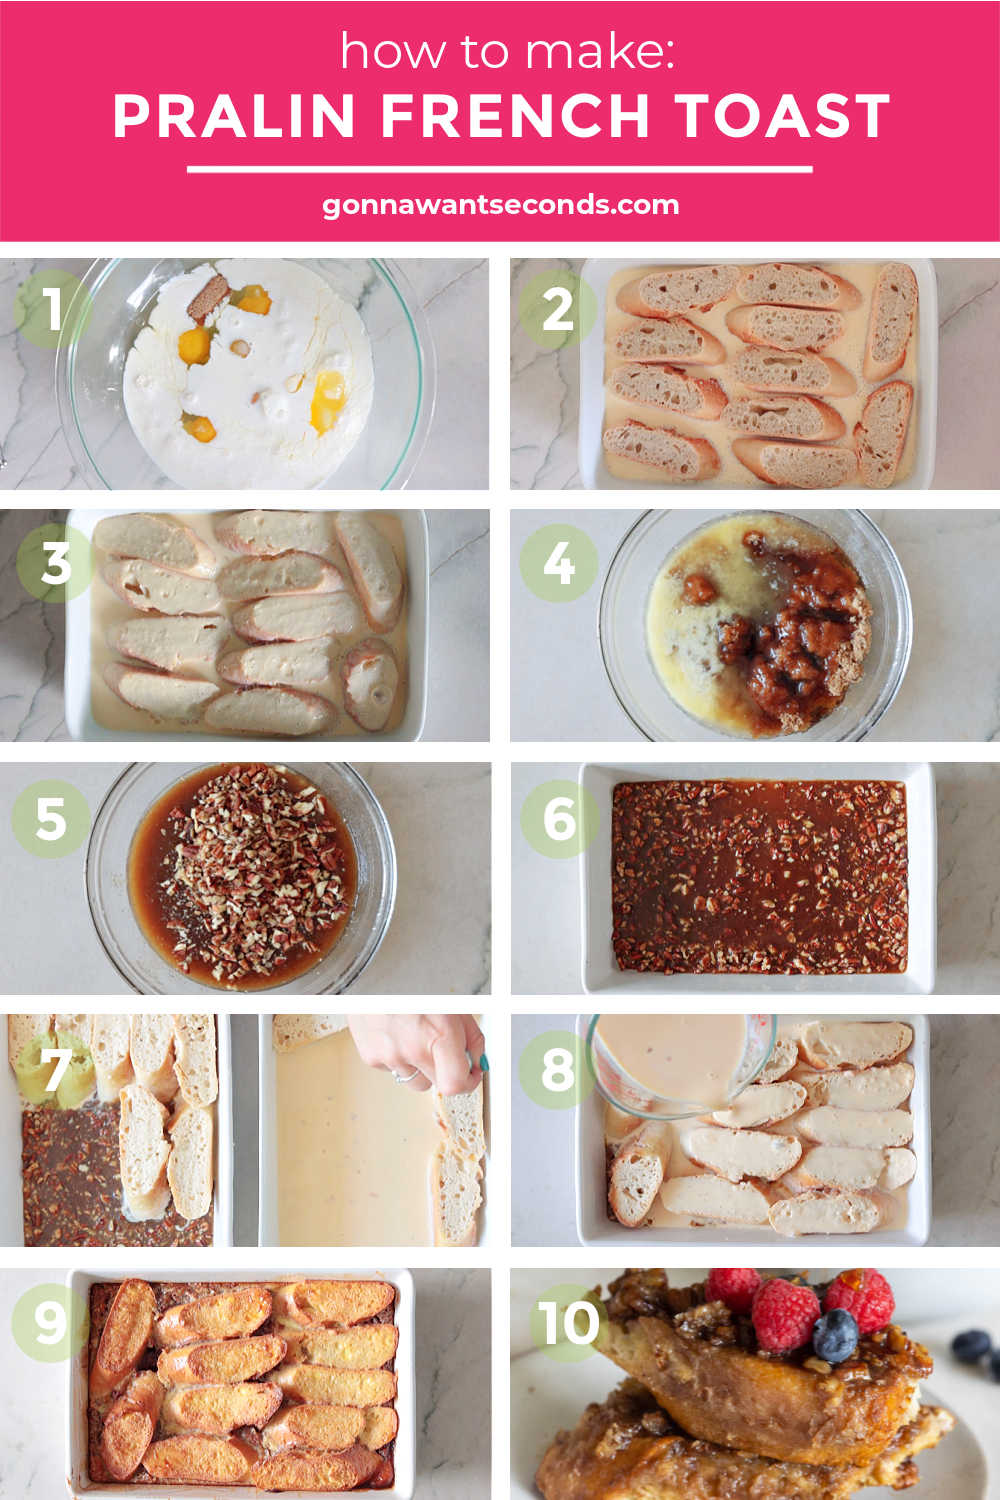 Step by step how to make praline french toast